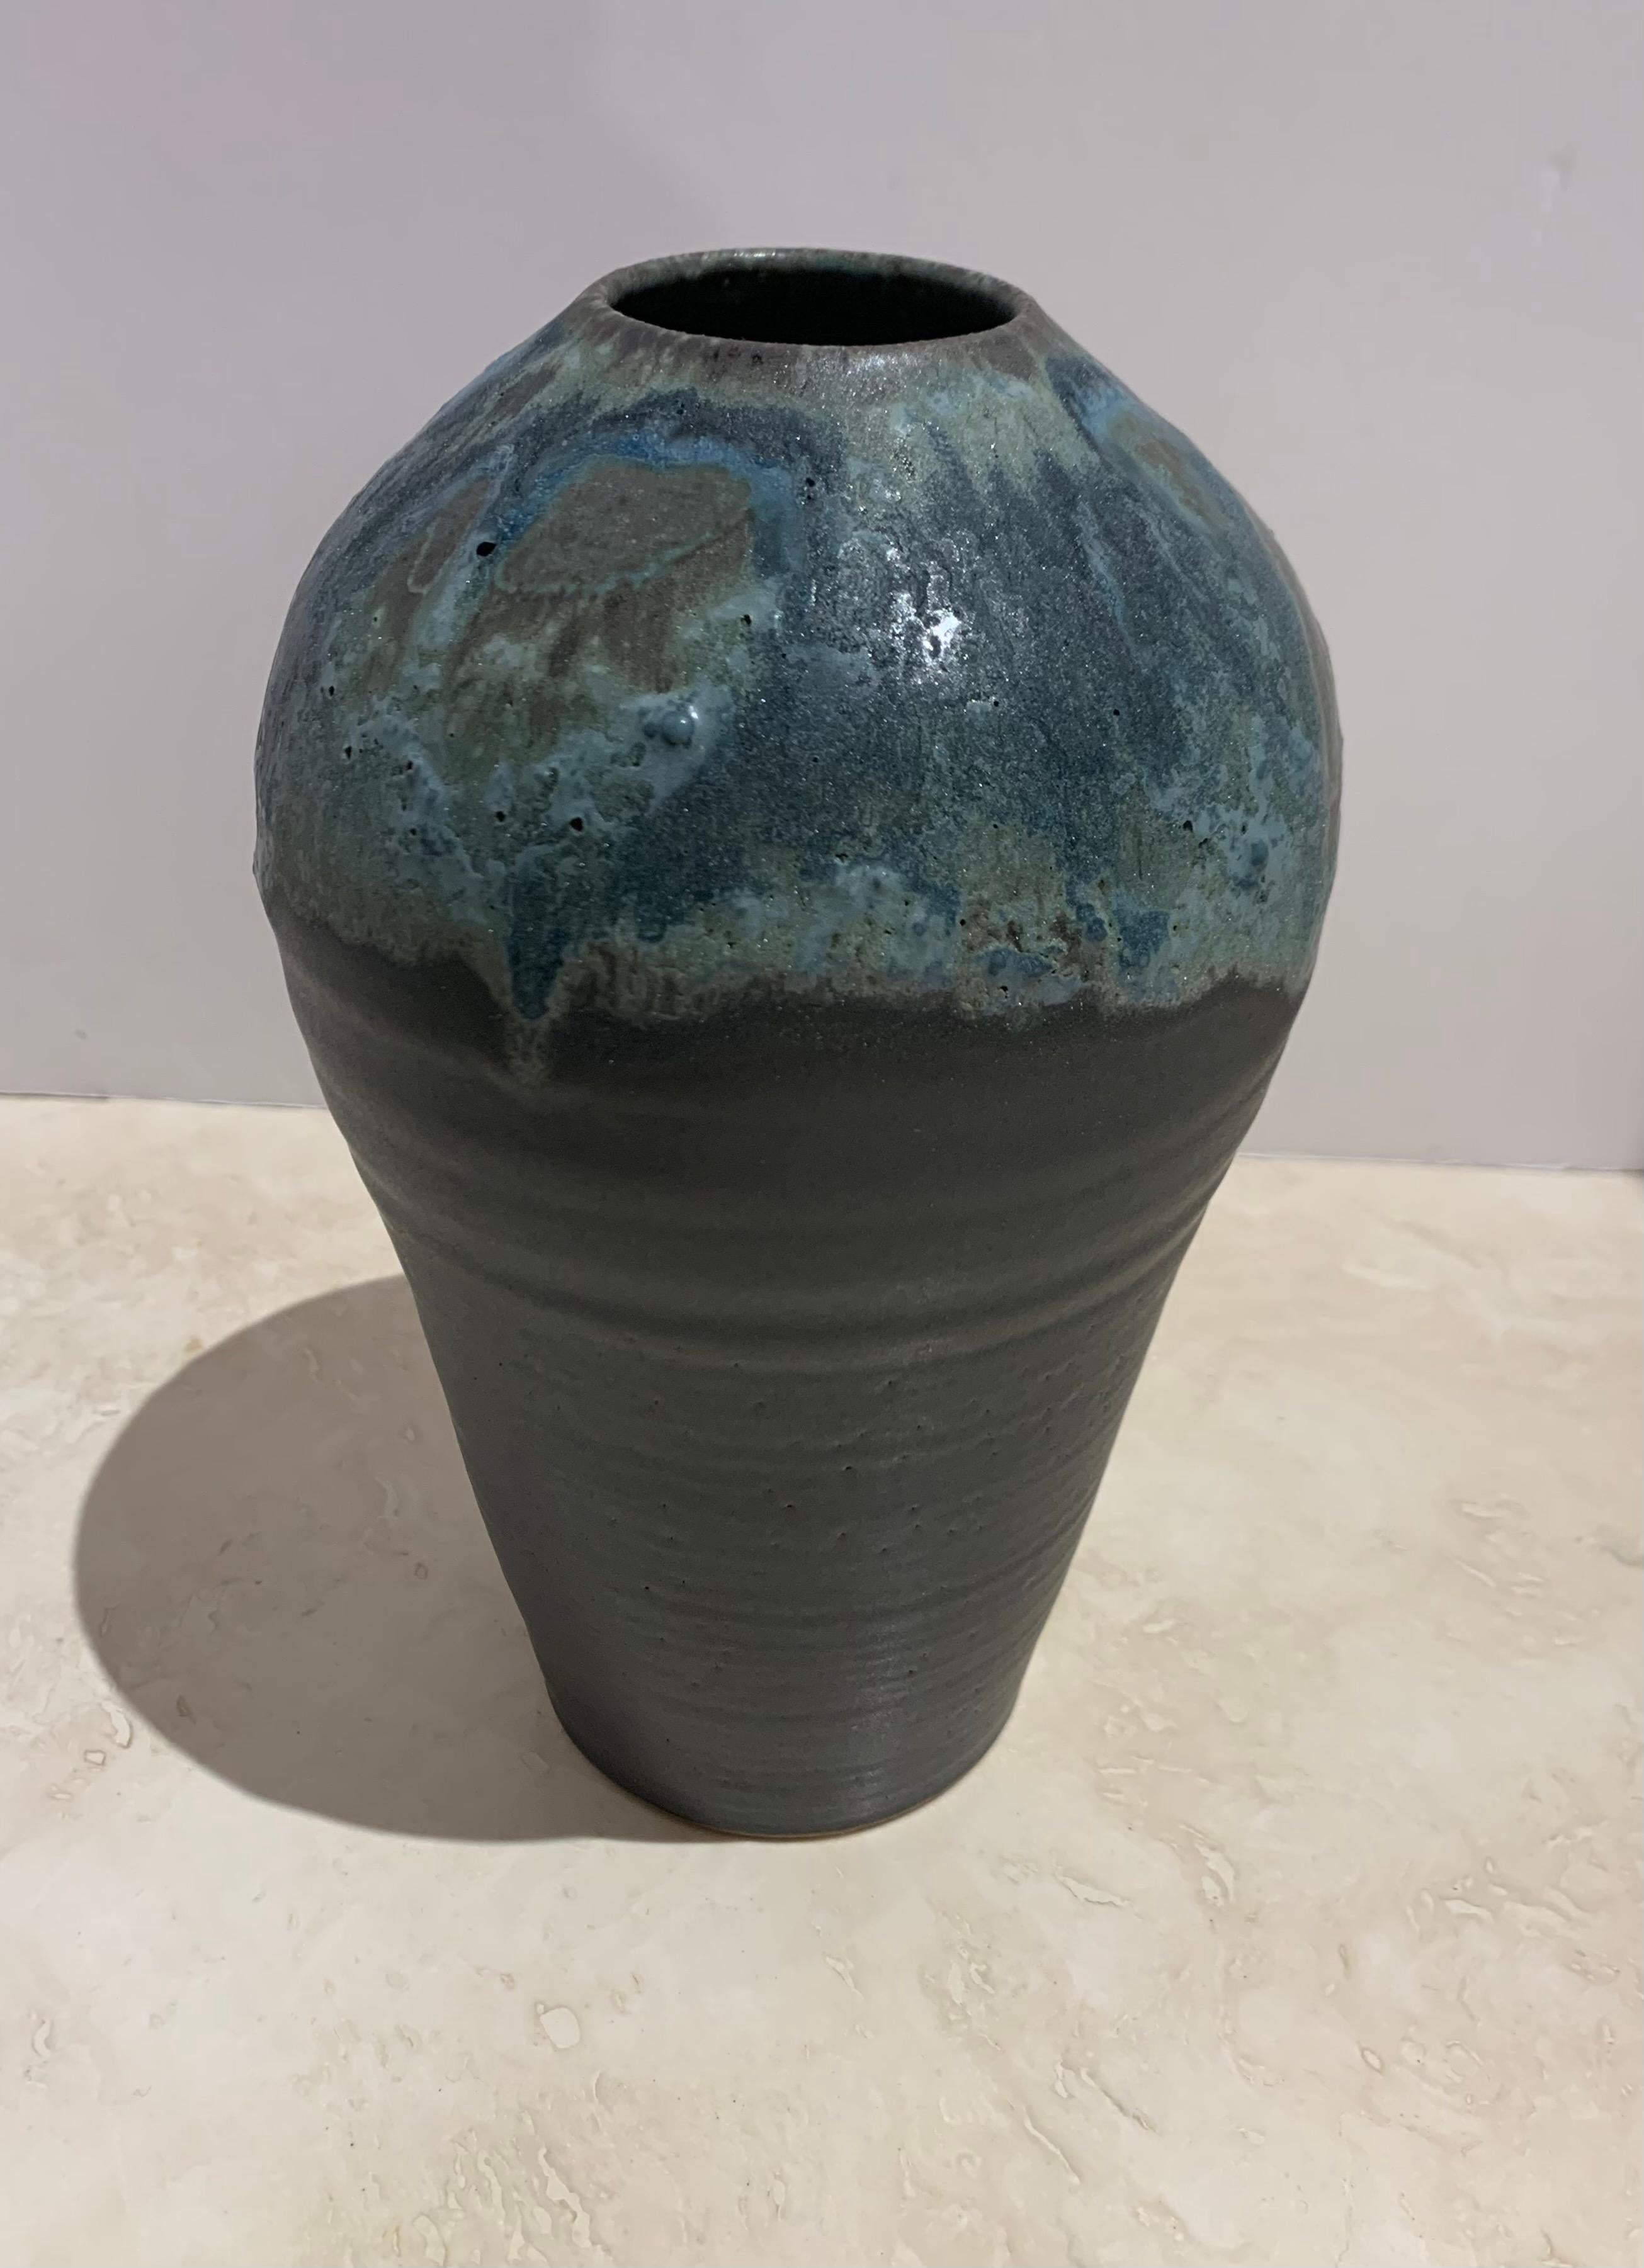 North American Blue and Charcoal Stoneware Vase by Peter Speliopoulos, USA, Contemporary